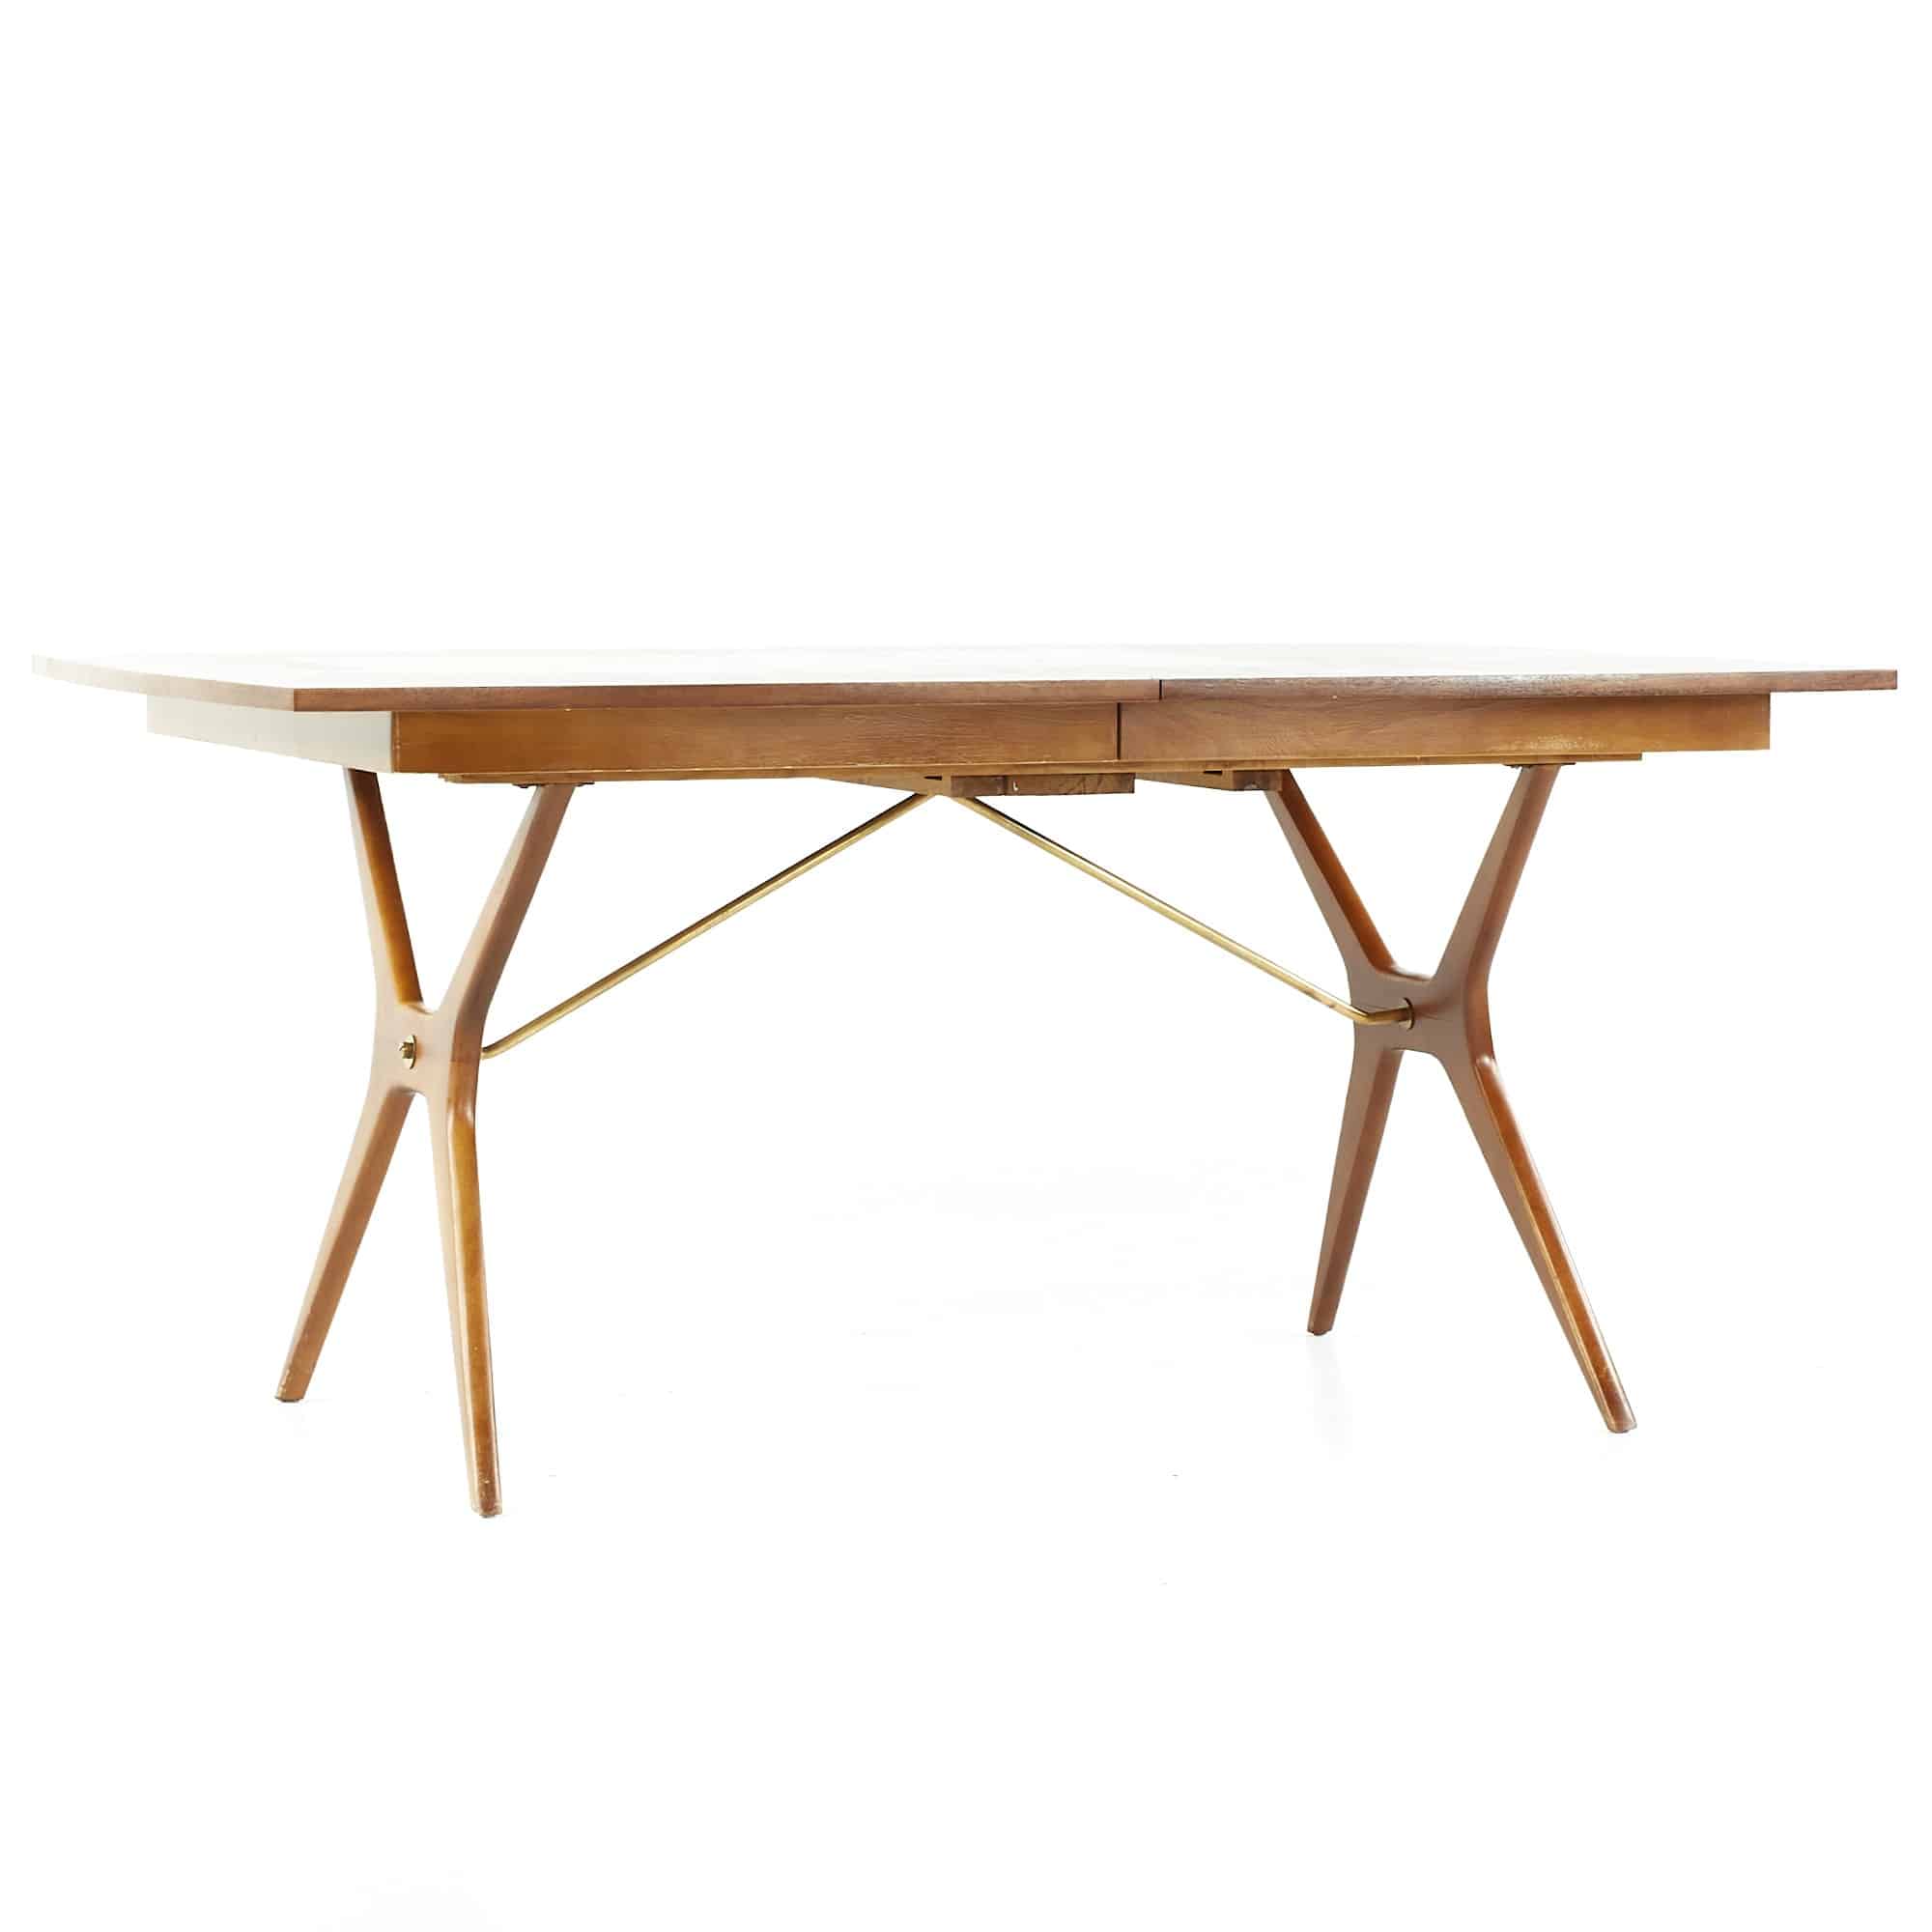 Rway Mid Century Walnut and Brass Expanding Dining Table with 2 Leaves